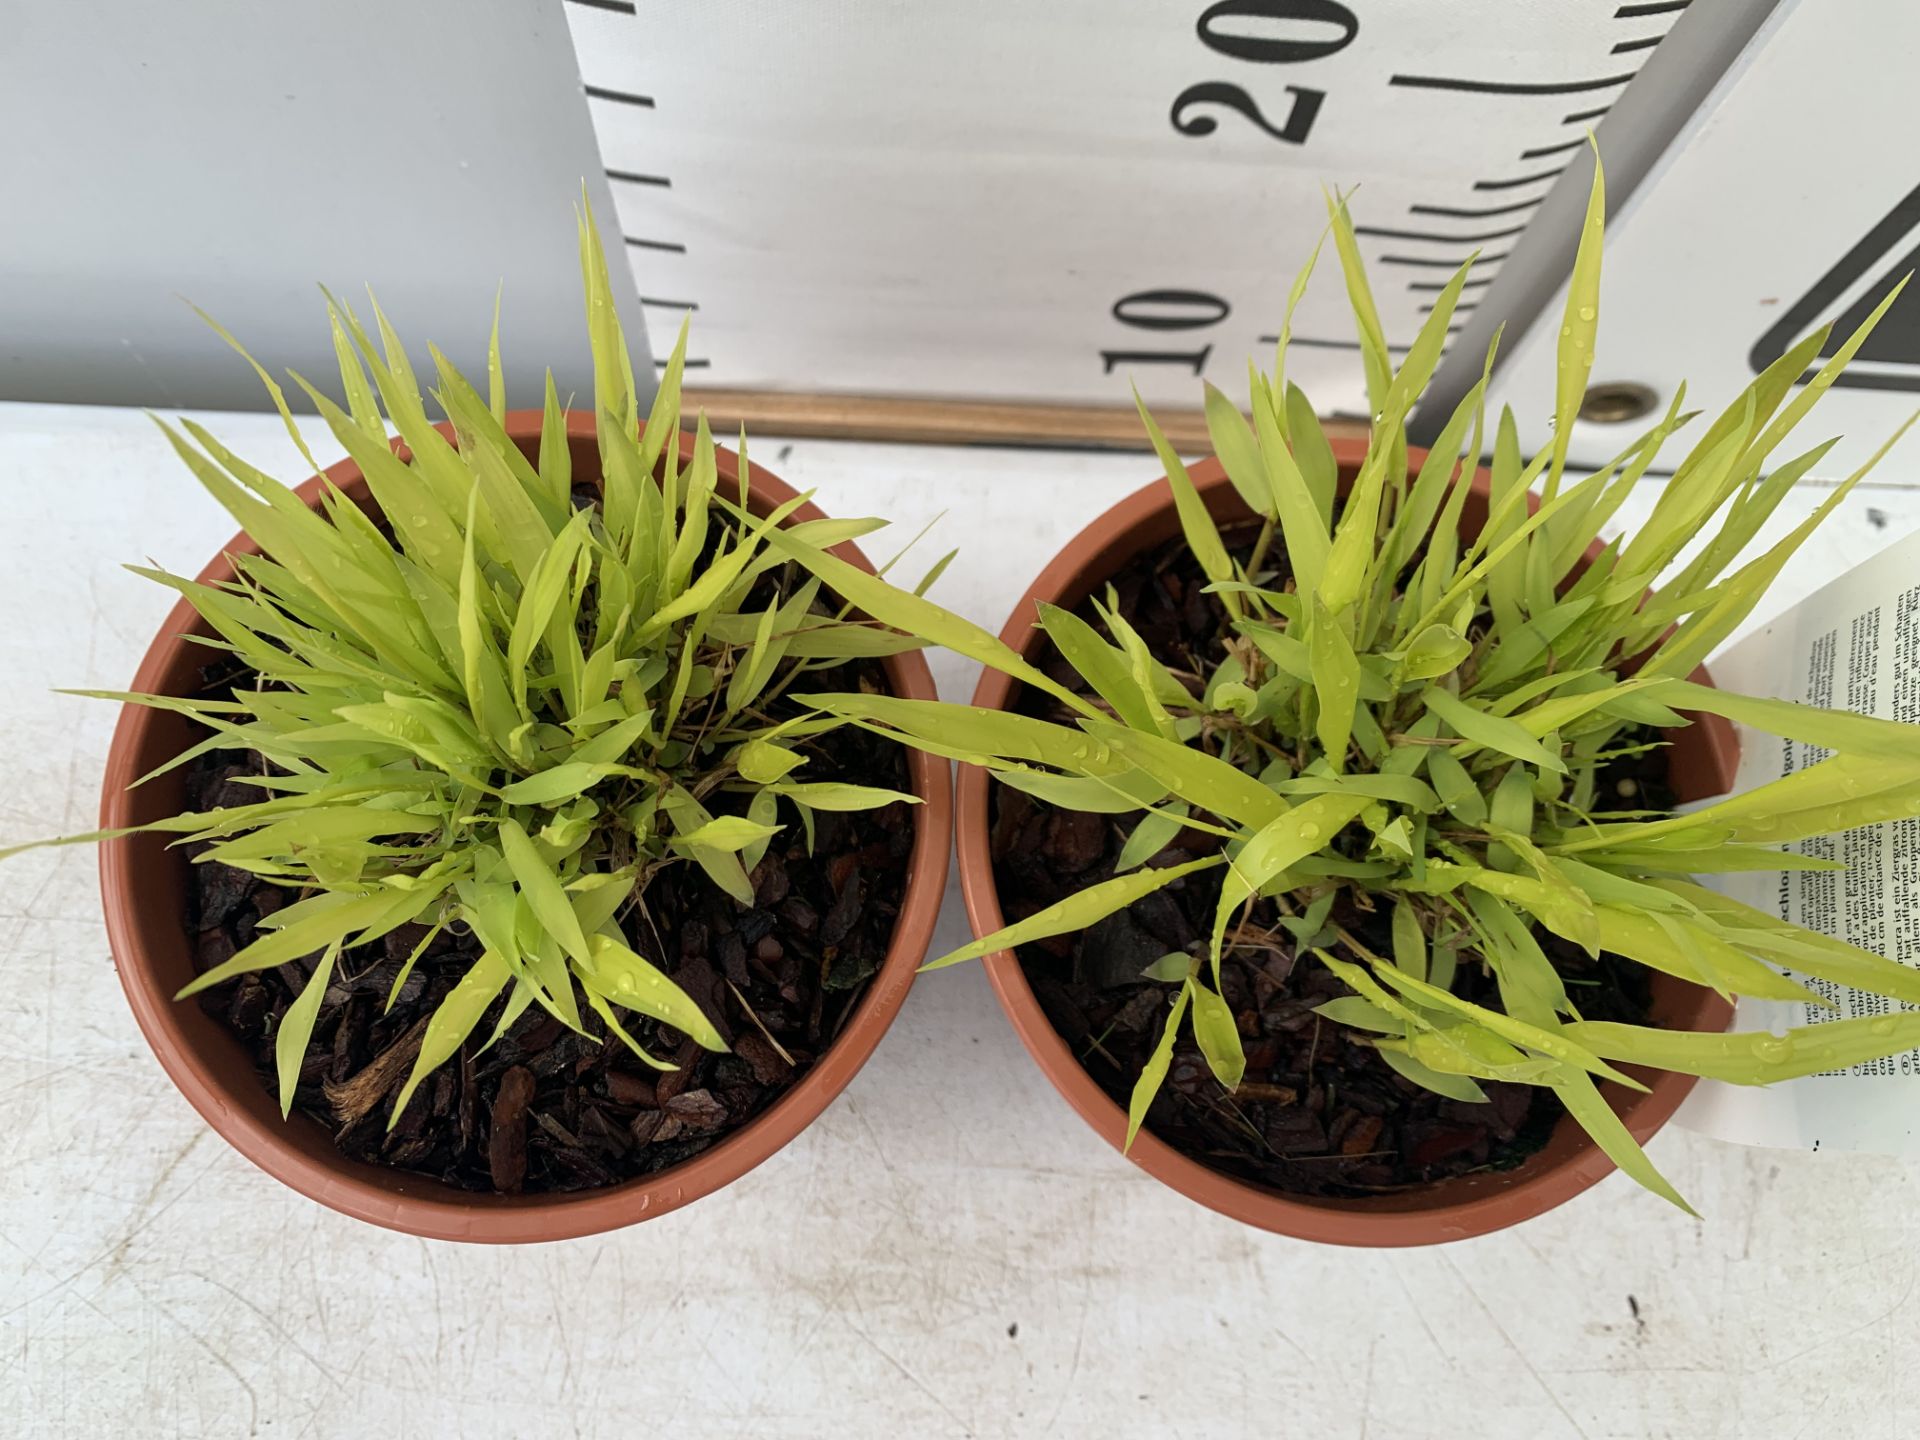 TWO ORNAMENTAL GRASSES HAKONECHLOA MACRA 'ALLGOLD' IN 1 LTR POTS PLUS VAT TO BE SOLD FOR THE TWO - Image 5 of 8